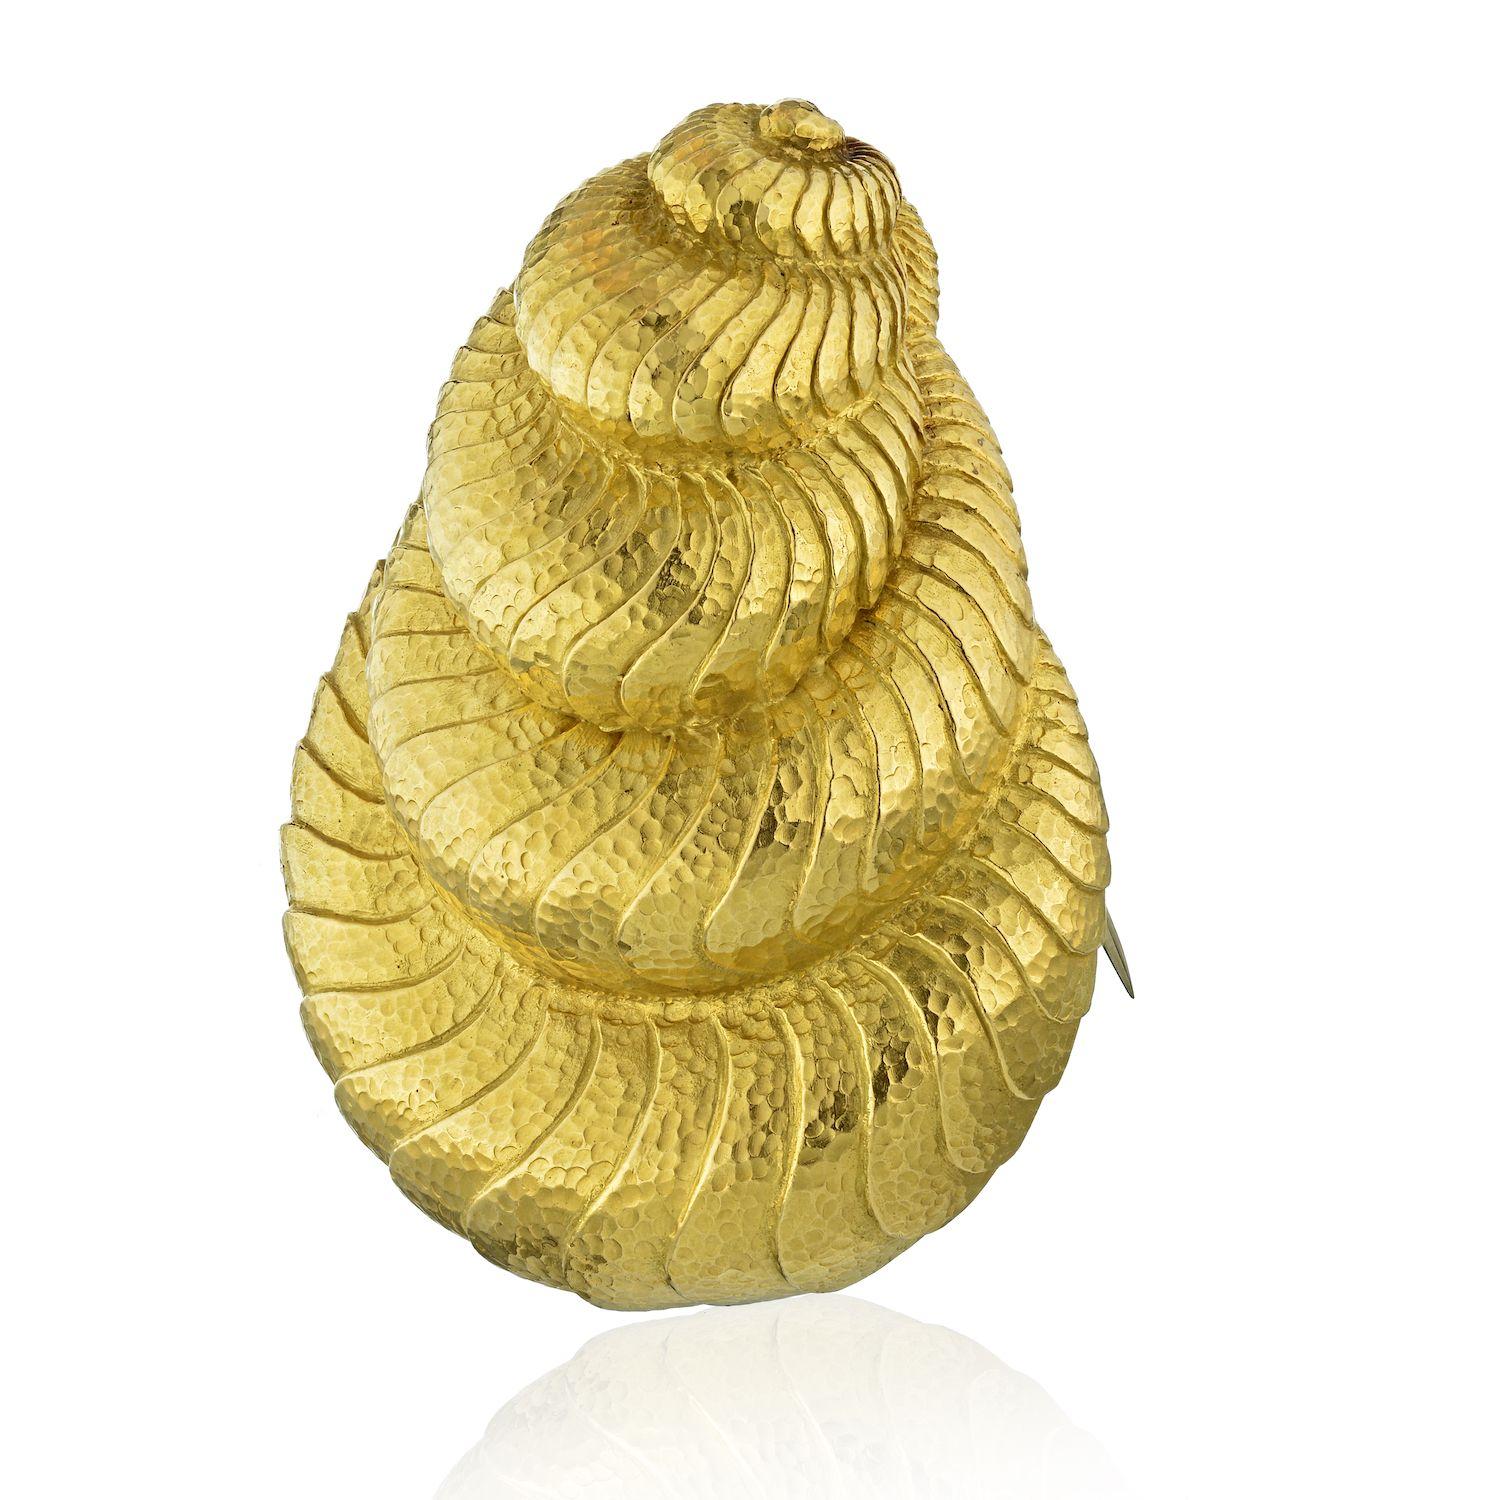 Stunning seashell style brooch by David Webb. Perfect for all of you ocean lovers to wear on a summer day clipped onto your favorite blouse, scarf or even a bag. It is of a medium to large size, finished in a traditional Webb hammered-finish. Double